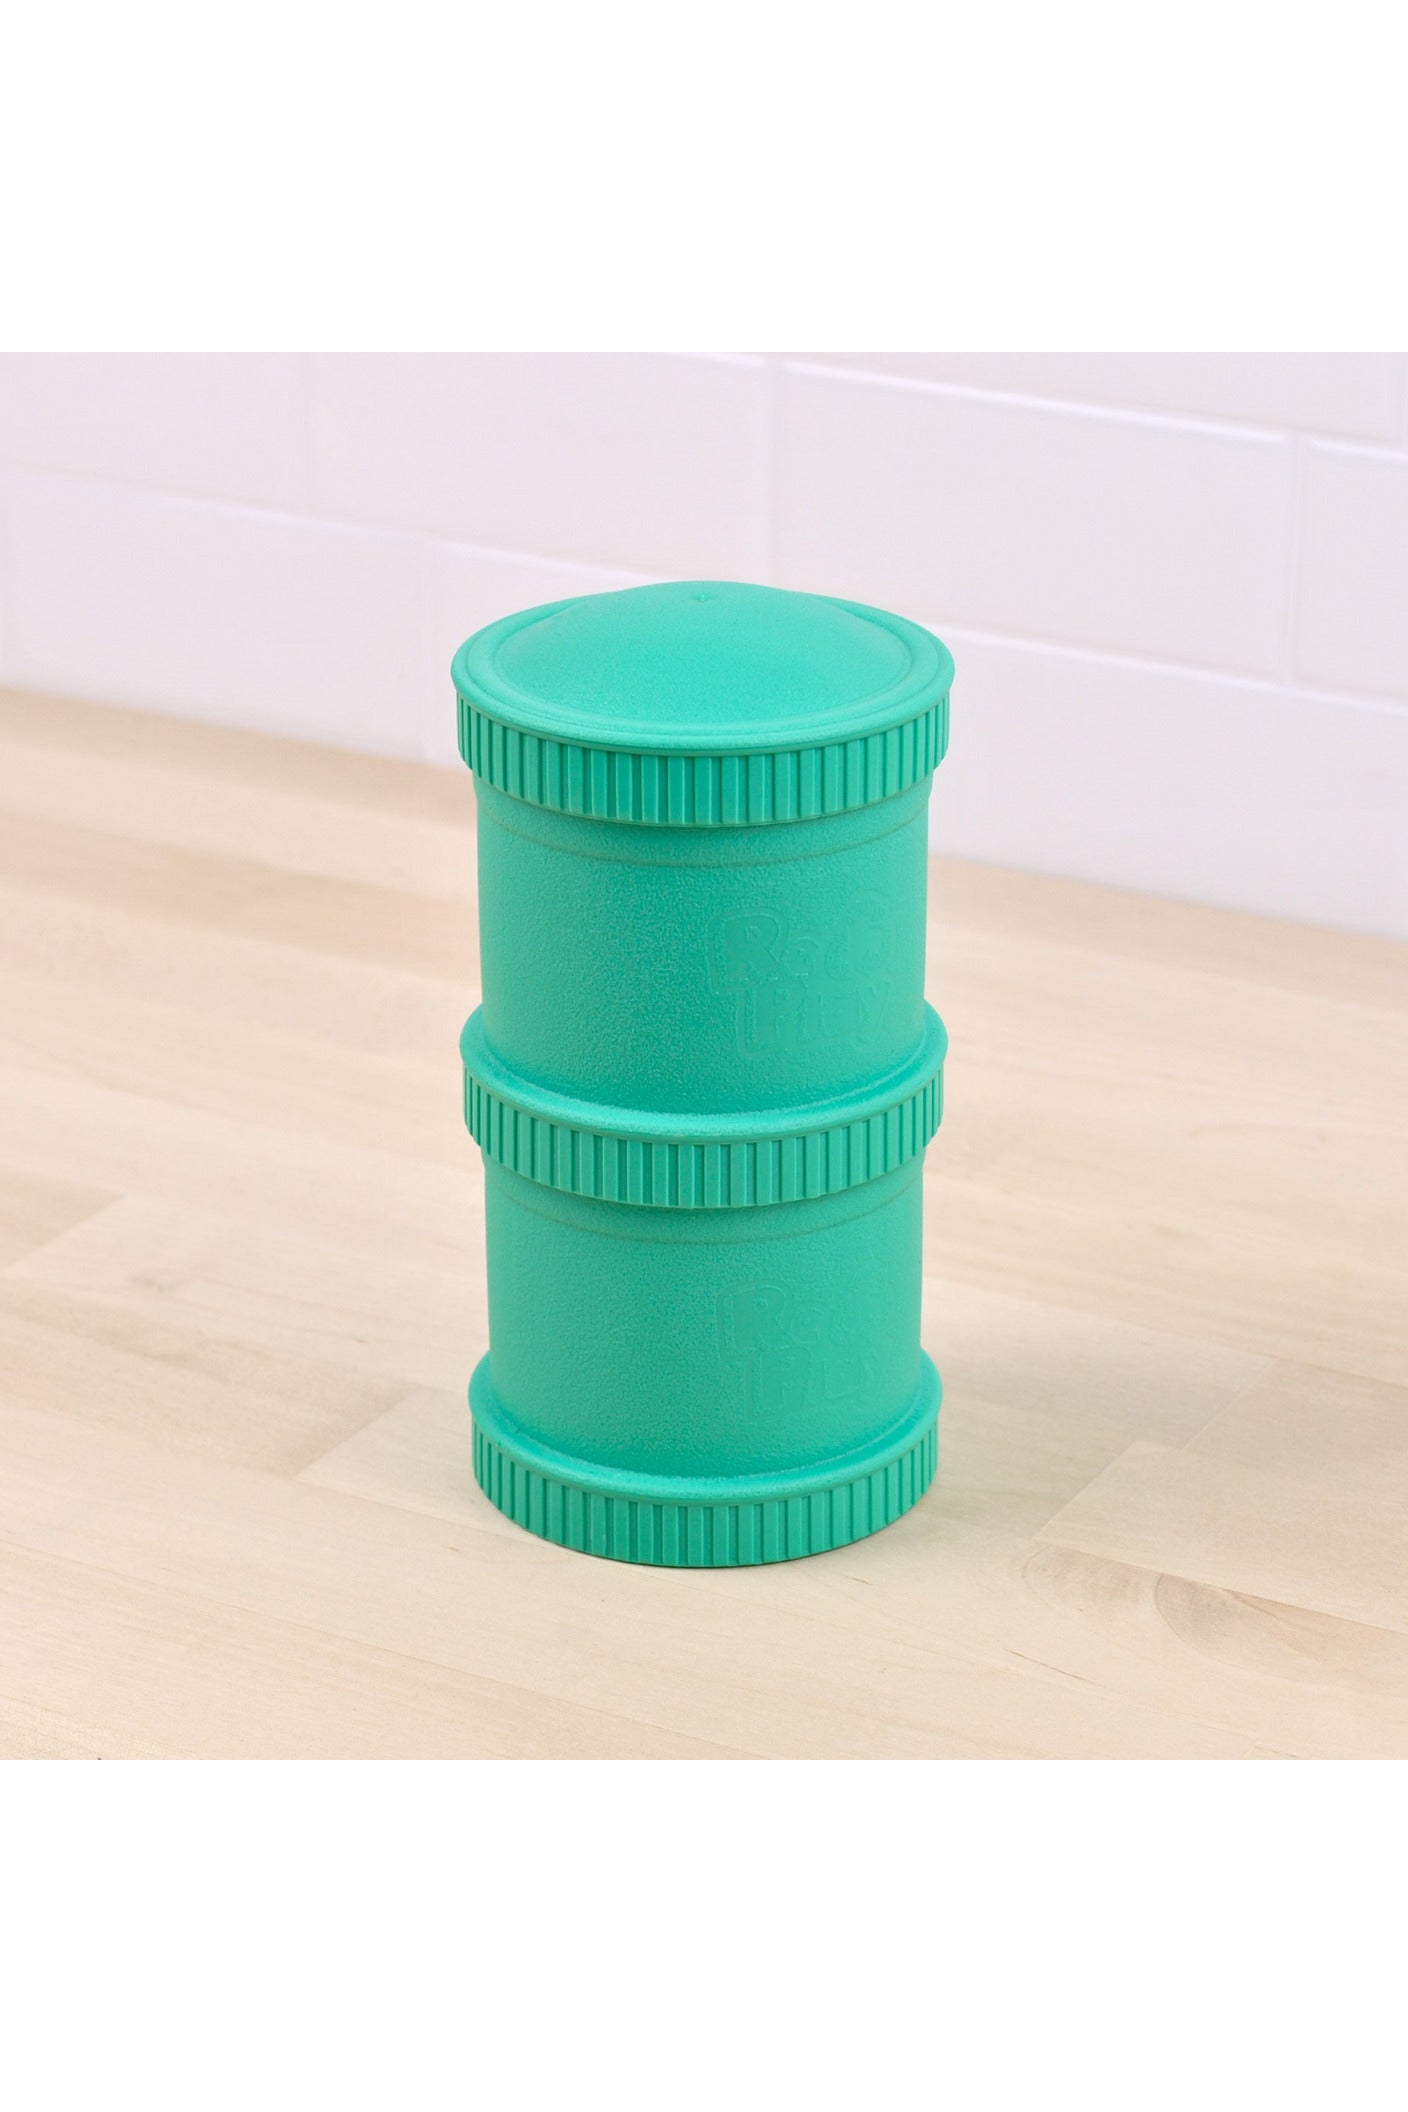 Re-Play Snack Stack (2 Pods and 1 Lid NO Retail Packaging) - Aqua